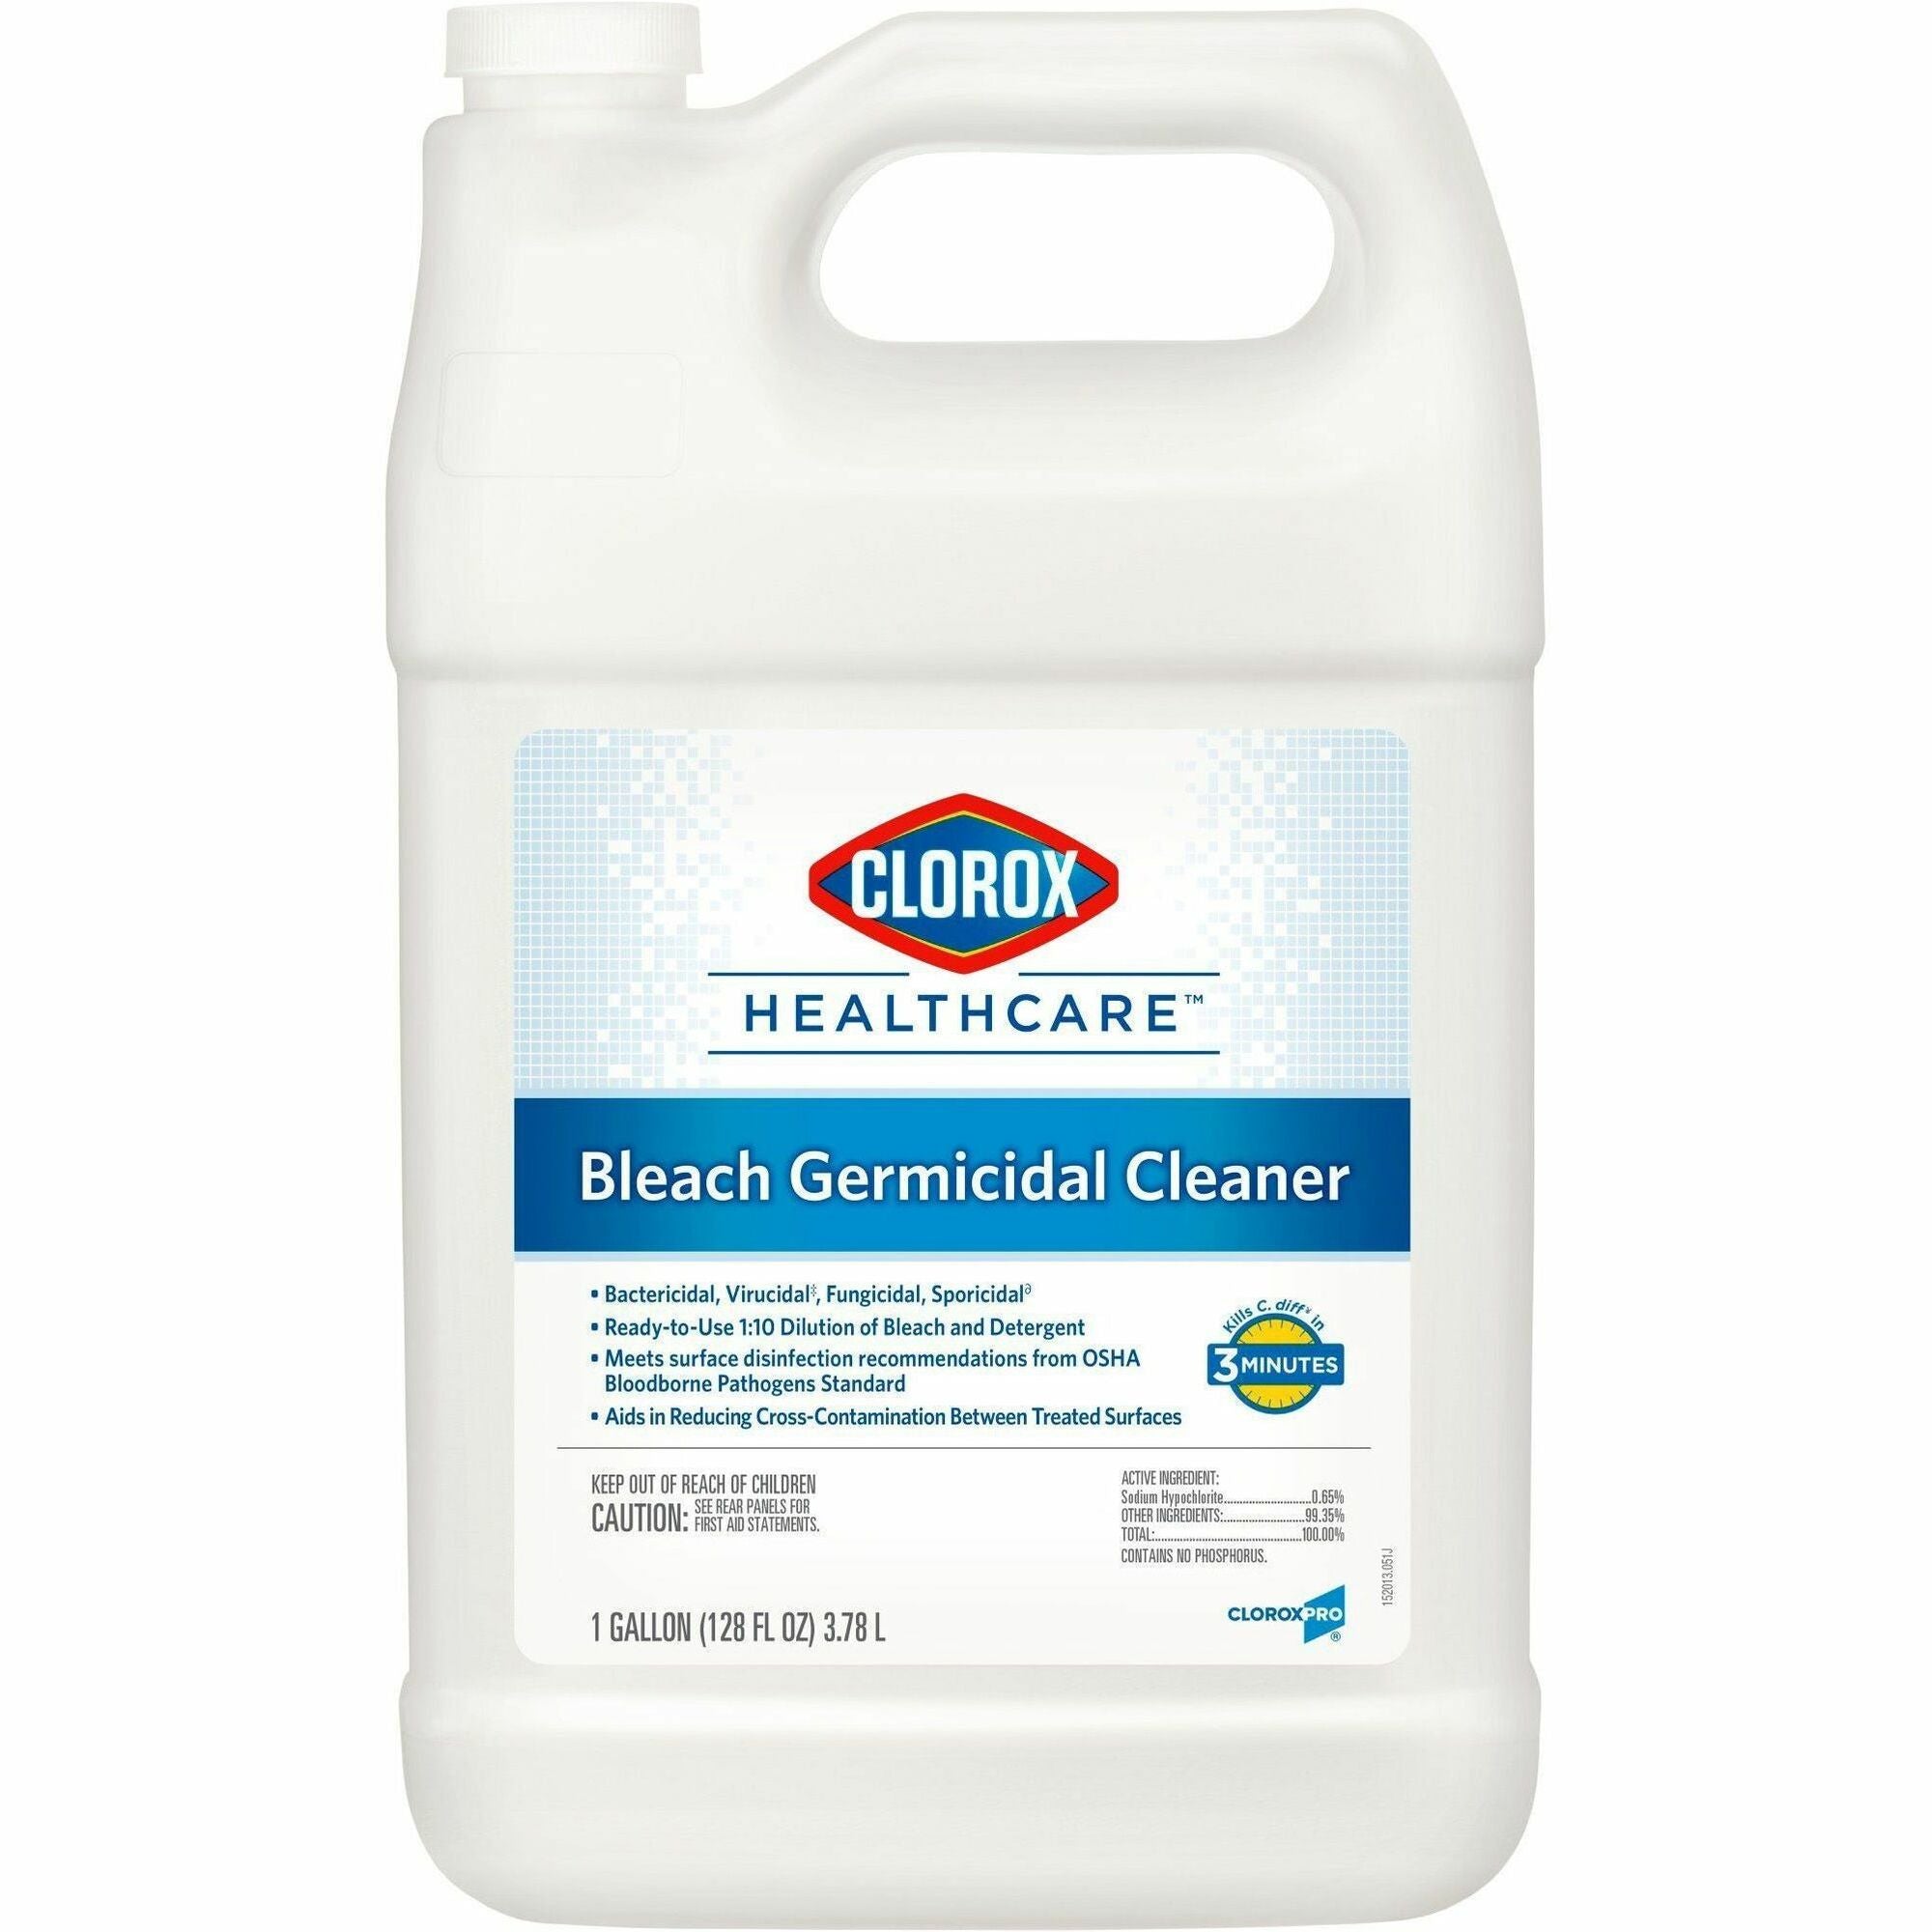 Clorox Healthcare Bleach Germicidal Cleaner Refill - Concentrate - 128 fl oz (4 quart) - 4 / Carton - Refillable, Disinfectant, Fast Acting, Cleanse, Anti-corrosive, Versatile, Antibacterial - White - 1